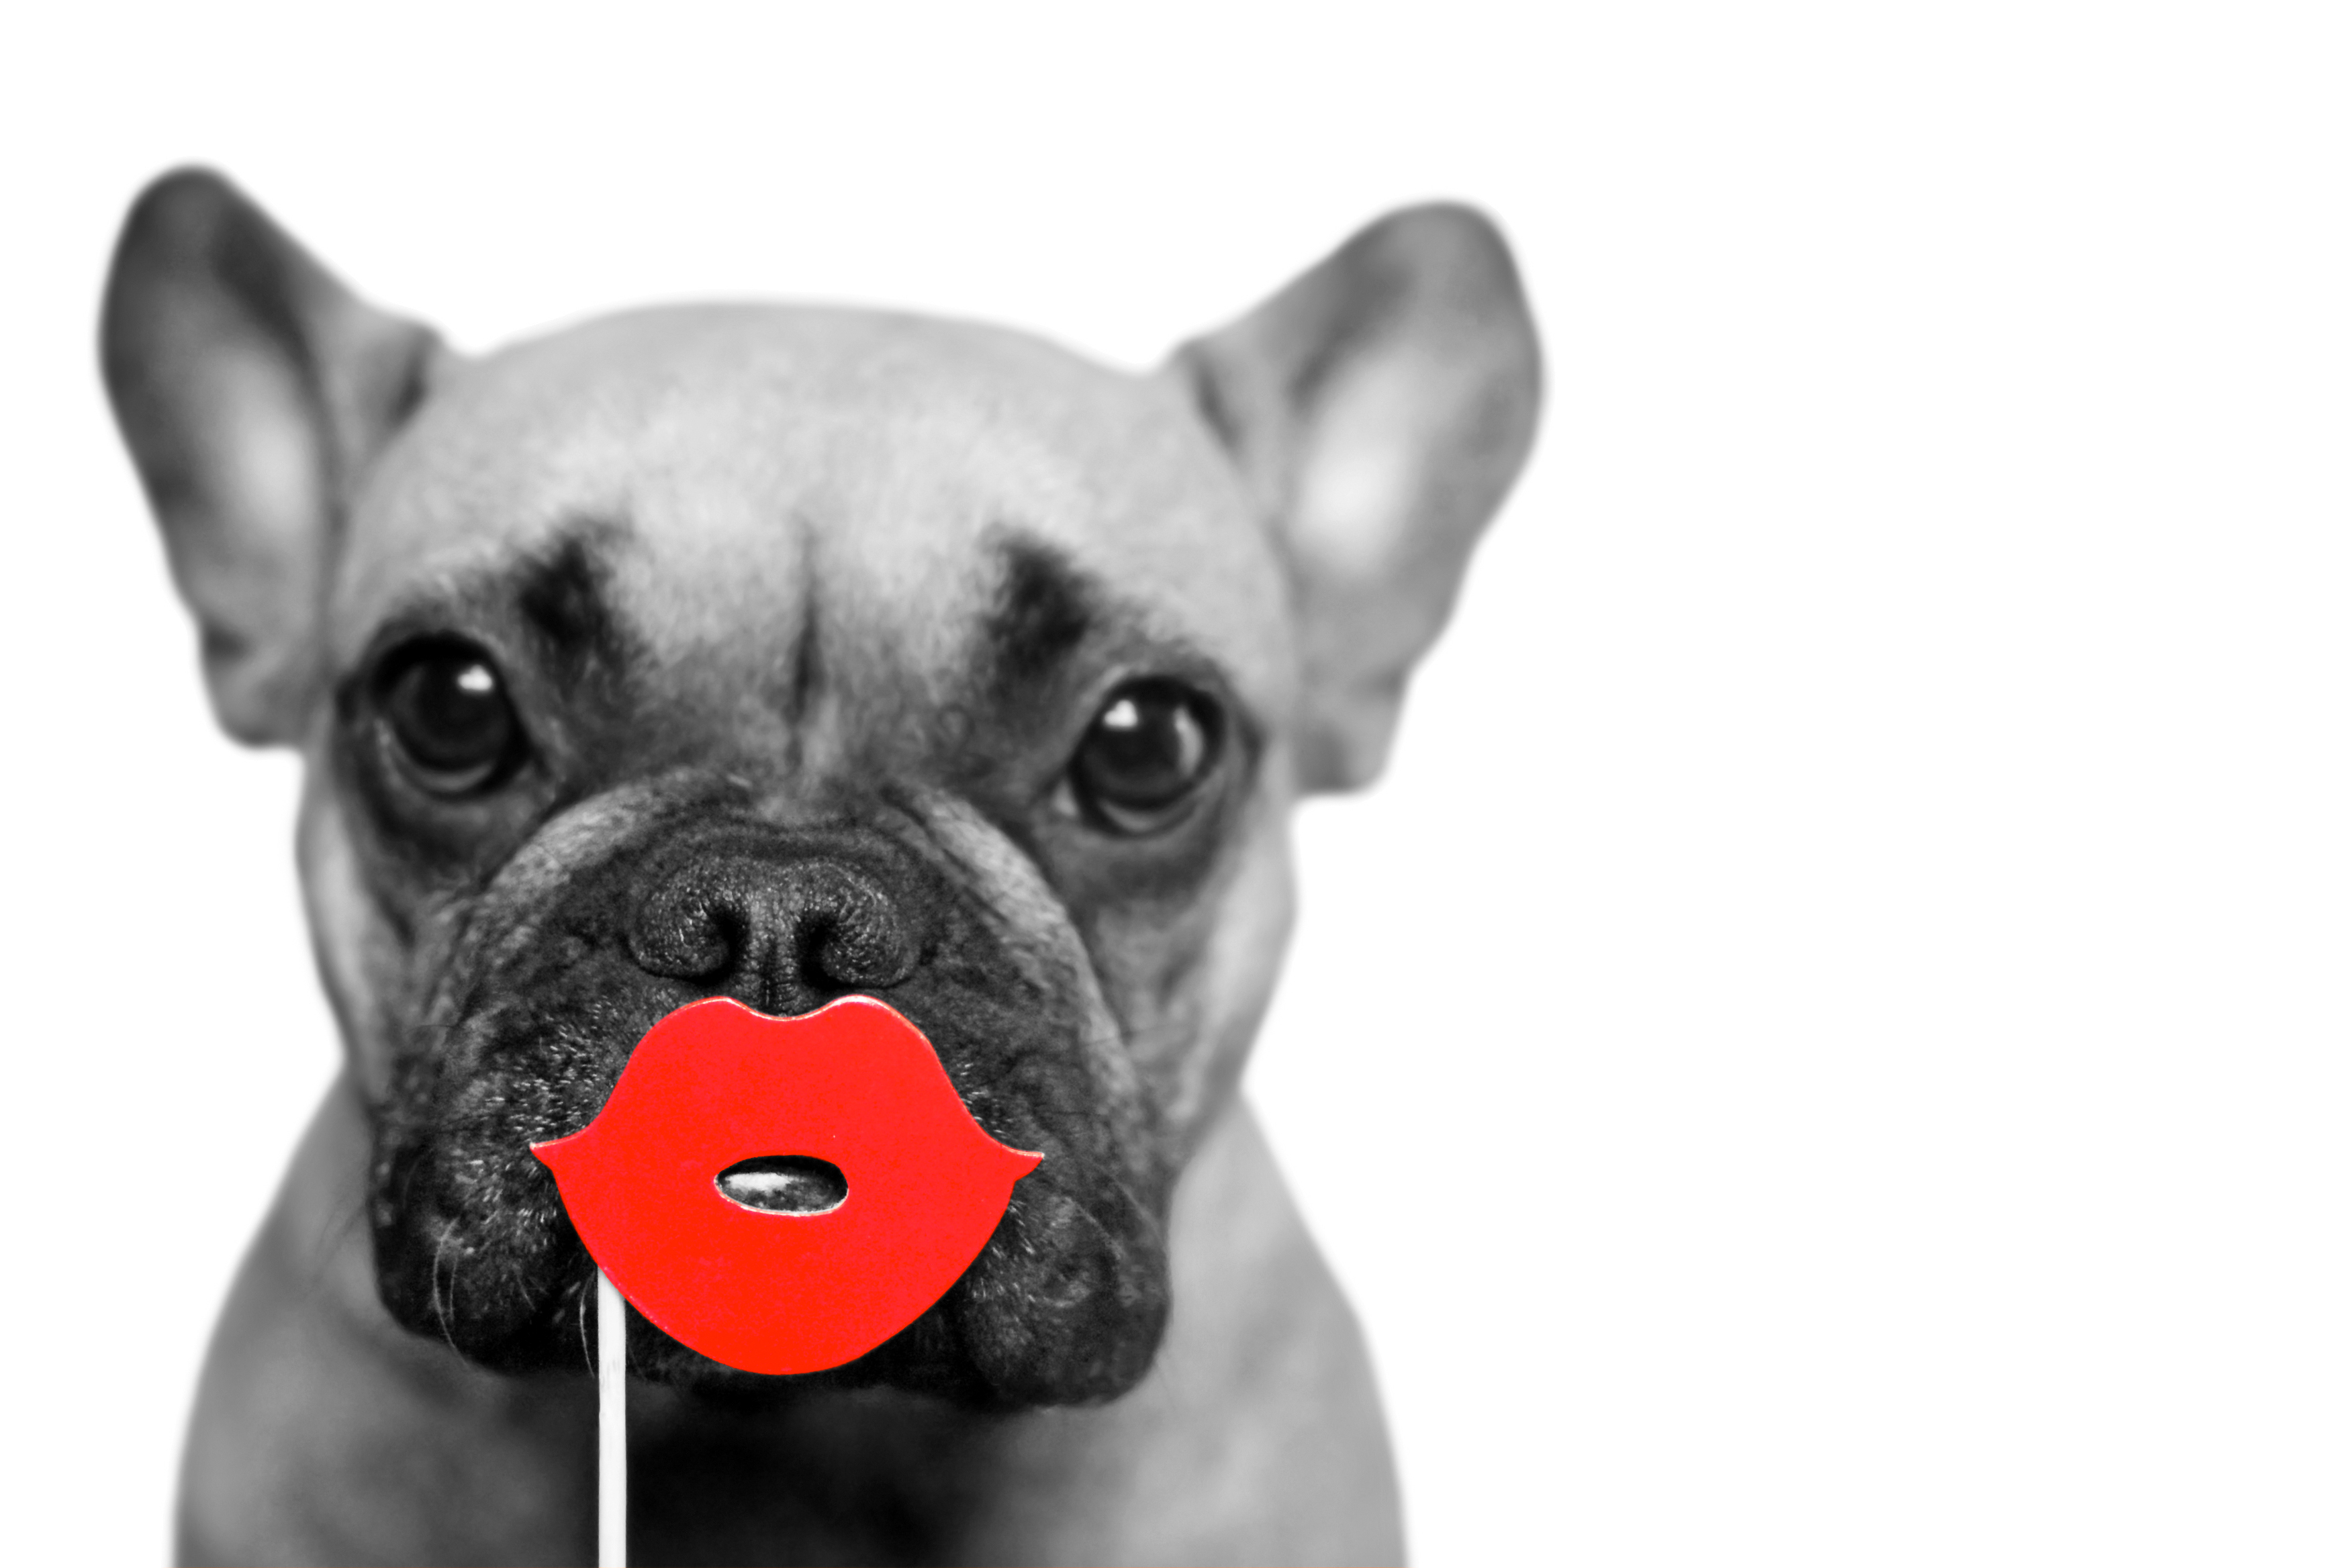 French bulldog captured with black and white dog photography, color splash effect on red lips photo booth prop